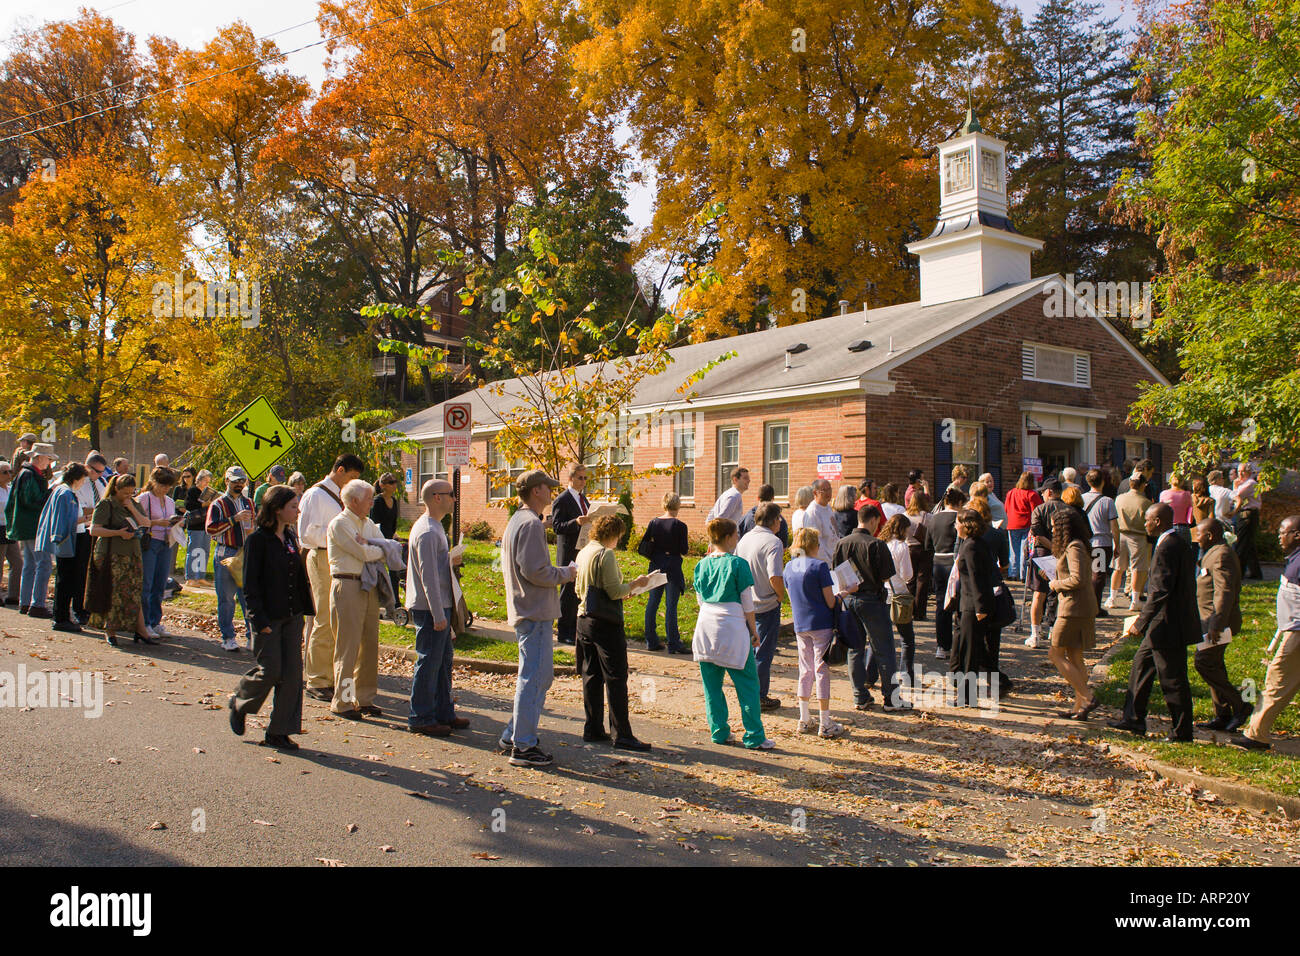 ARLINGTON VIRGINIA USA Voters line up late in the morning to vote in the presidential election on November 2, 2004 Stock Photo